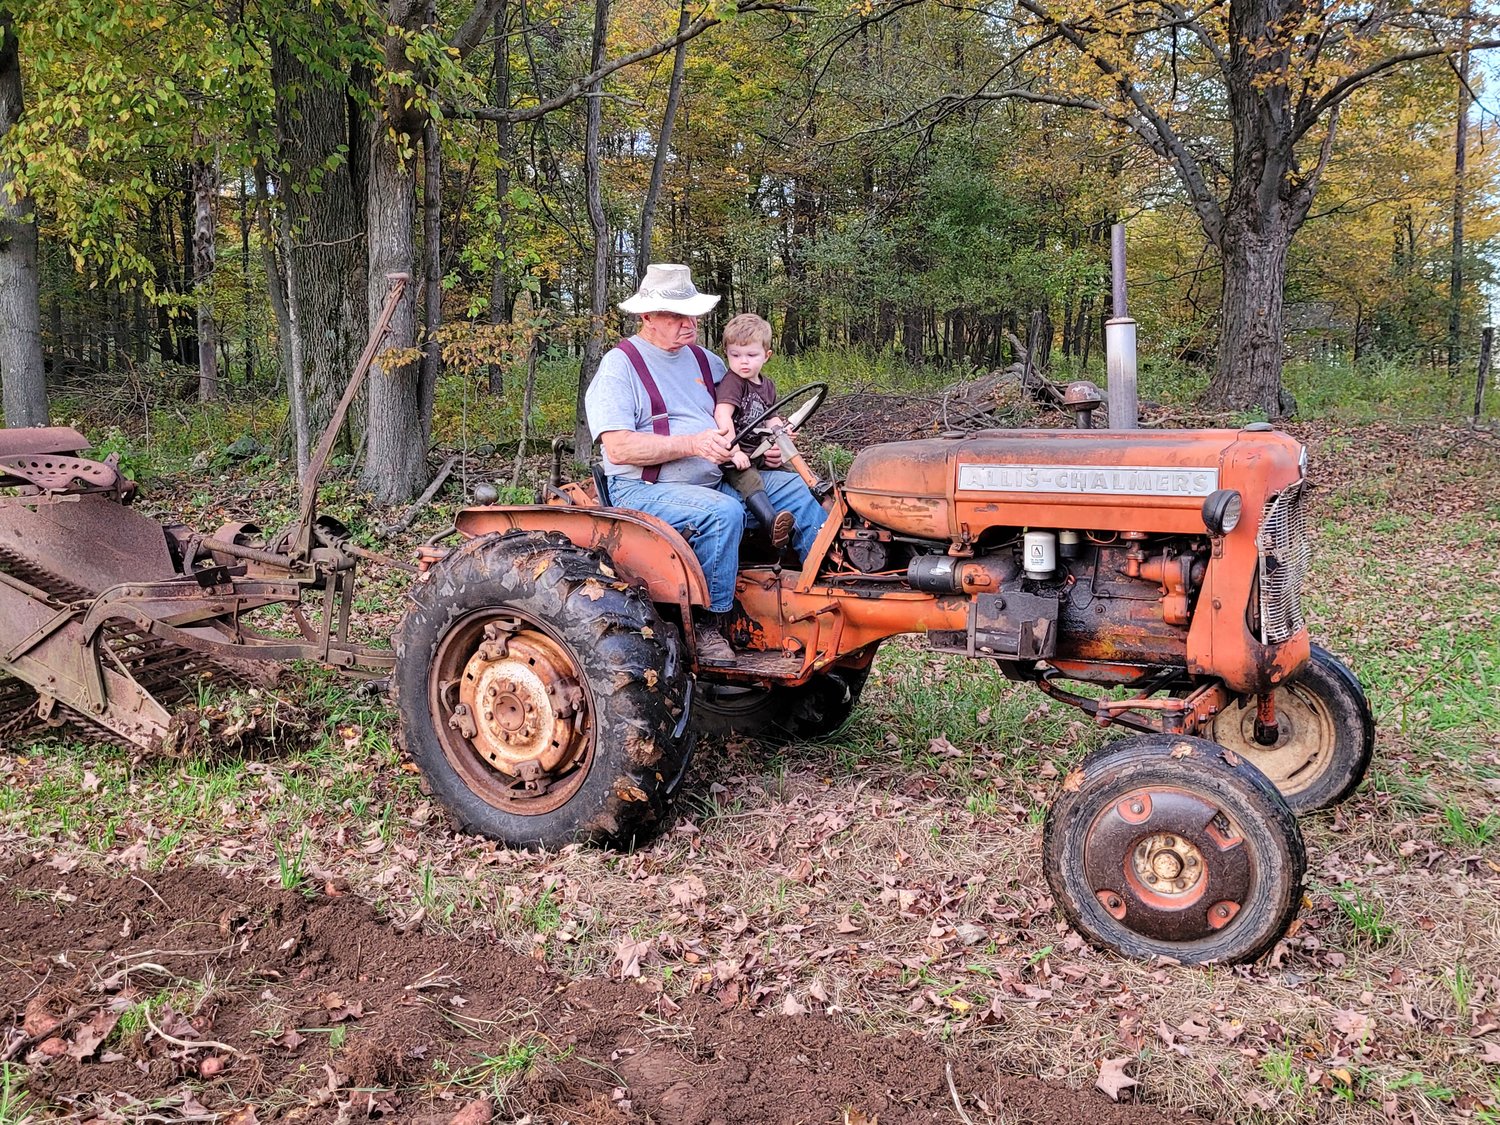 Rorick sits on the tractor, harvesting potatoes with his grandpa.